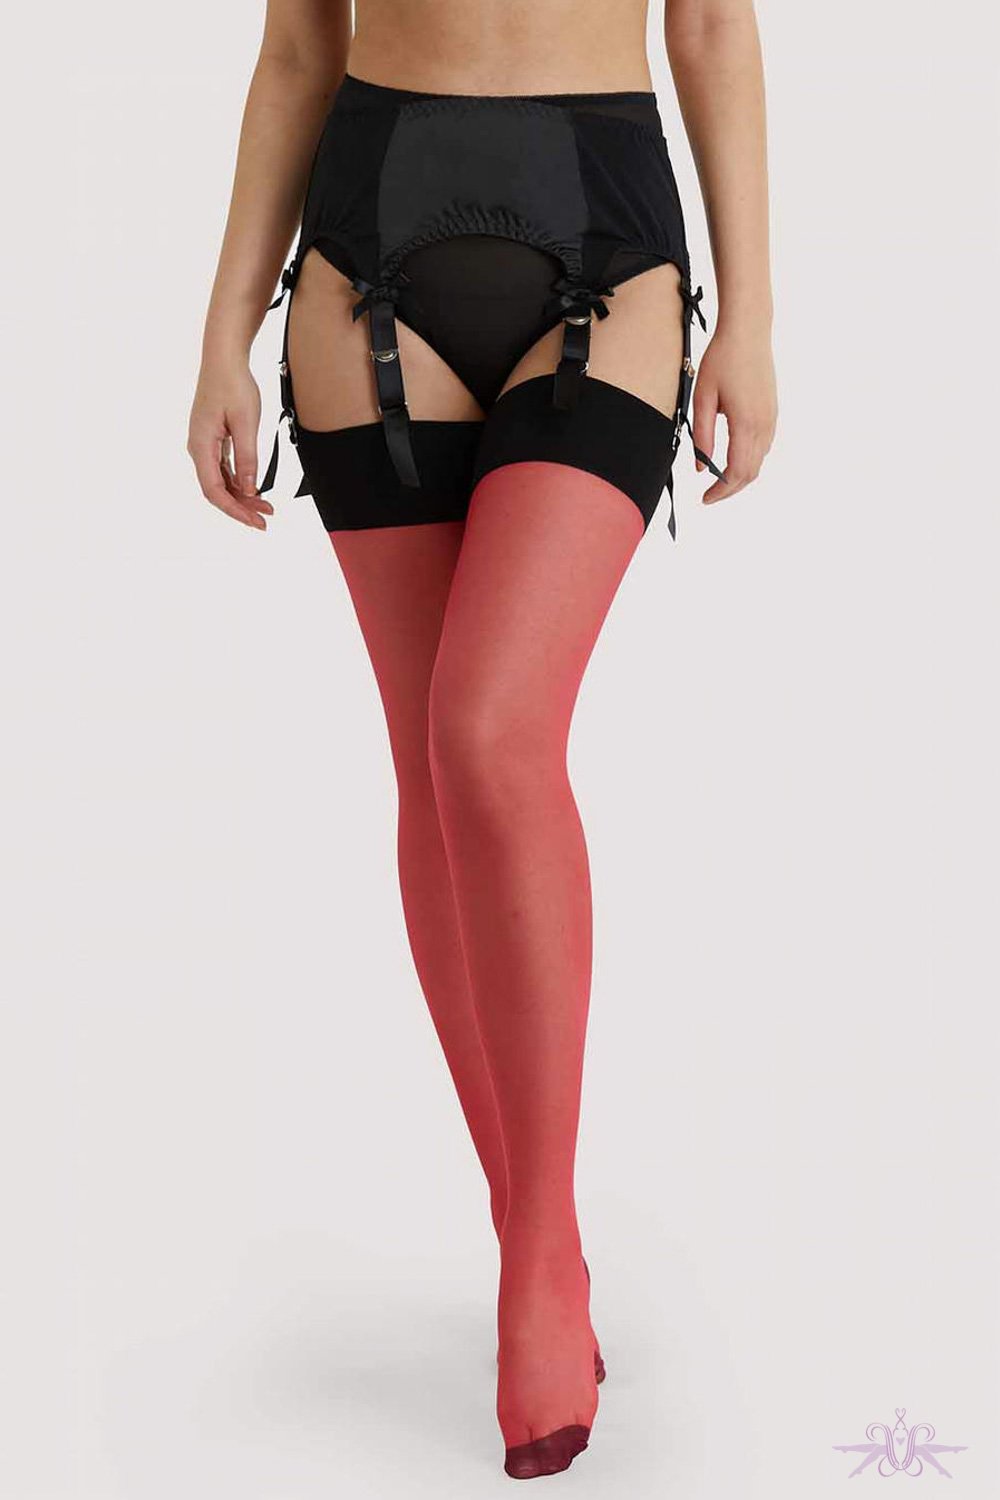 Playful Promises Red Bow Seamed Stockings